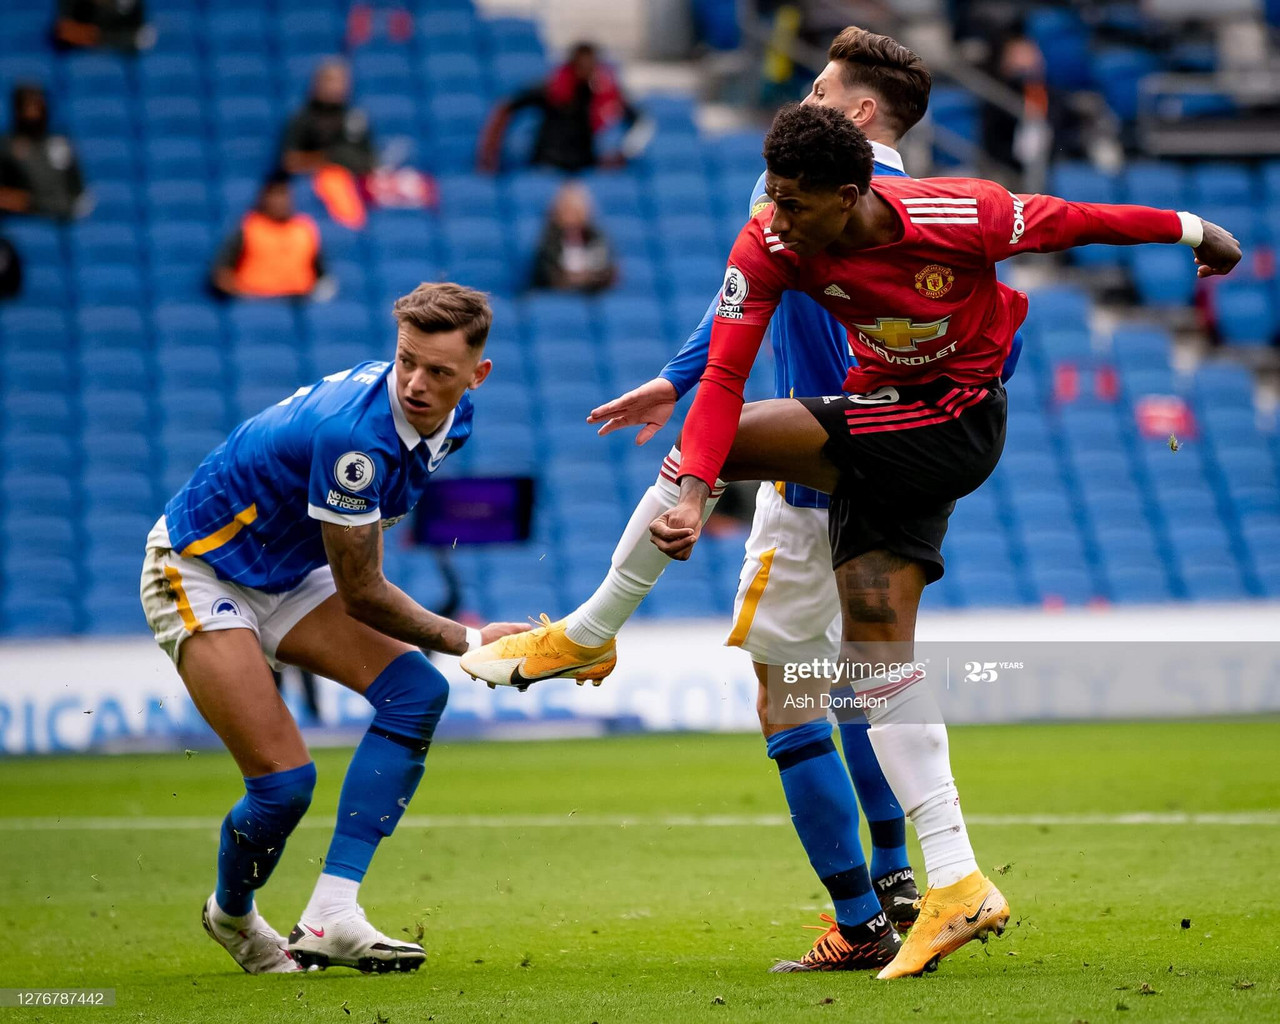 Brighton & Hove Albion 2-3 Manchester United player ratings: The woodwork United's best friend